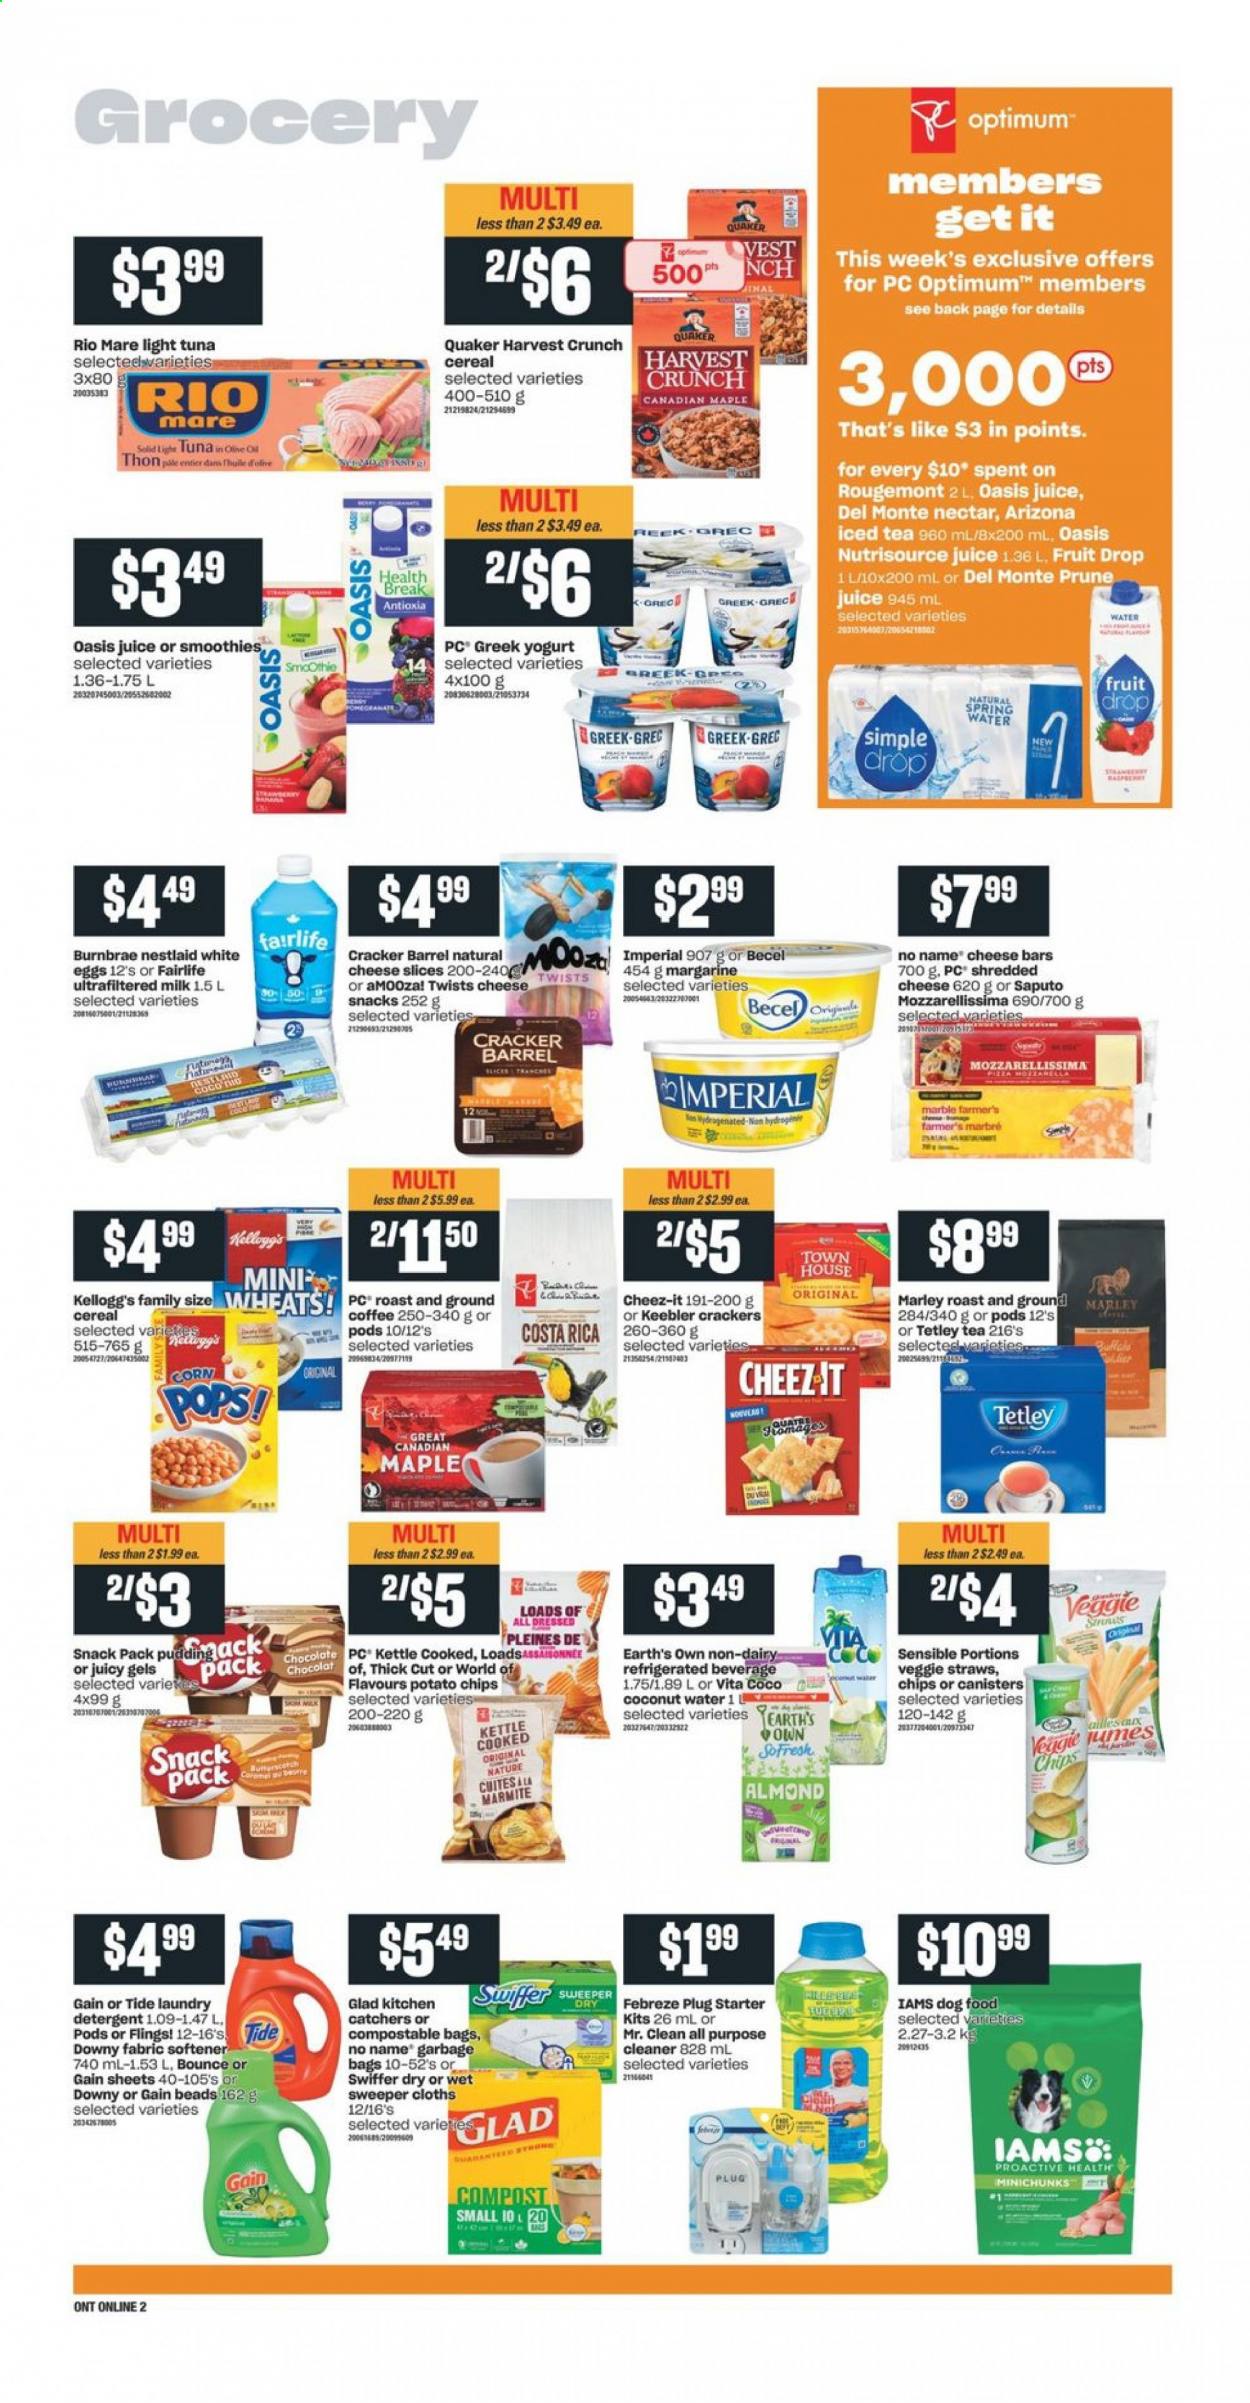 thumbnail - Independent Flyer - April 29, 2021 - May 05, 2021 - Sales products - corn, No Name, Quaker, shredded cheese, sliced cheese, greek yoghurt, yoghurt, milk, eggs, margarine, crackers, Kellogg's, Keebler, potato chips, veggie straws, Cheez-It, light tuna, cereals, juice, ice tea, coconut water, AriZona, spring water, coffee, Febreze, Gain, cleaner, all purpose cleaner, Swiffer, Tide, fabric softener, laundry detergent, Downy Laundry, bag, animal food, dog food, Optimum, NutriSource, Iams, chips. Page 6.